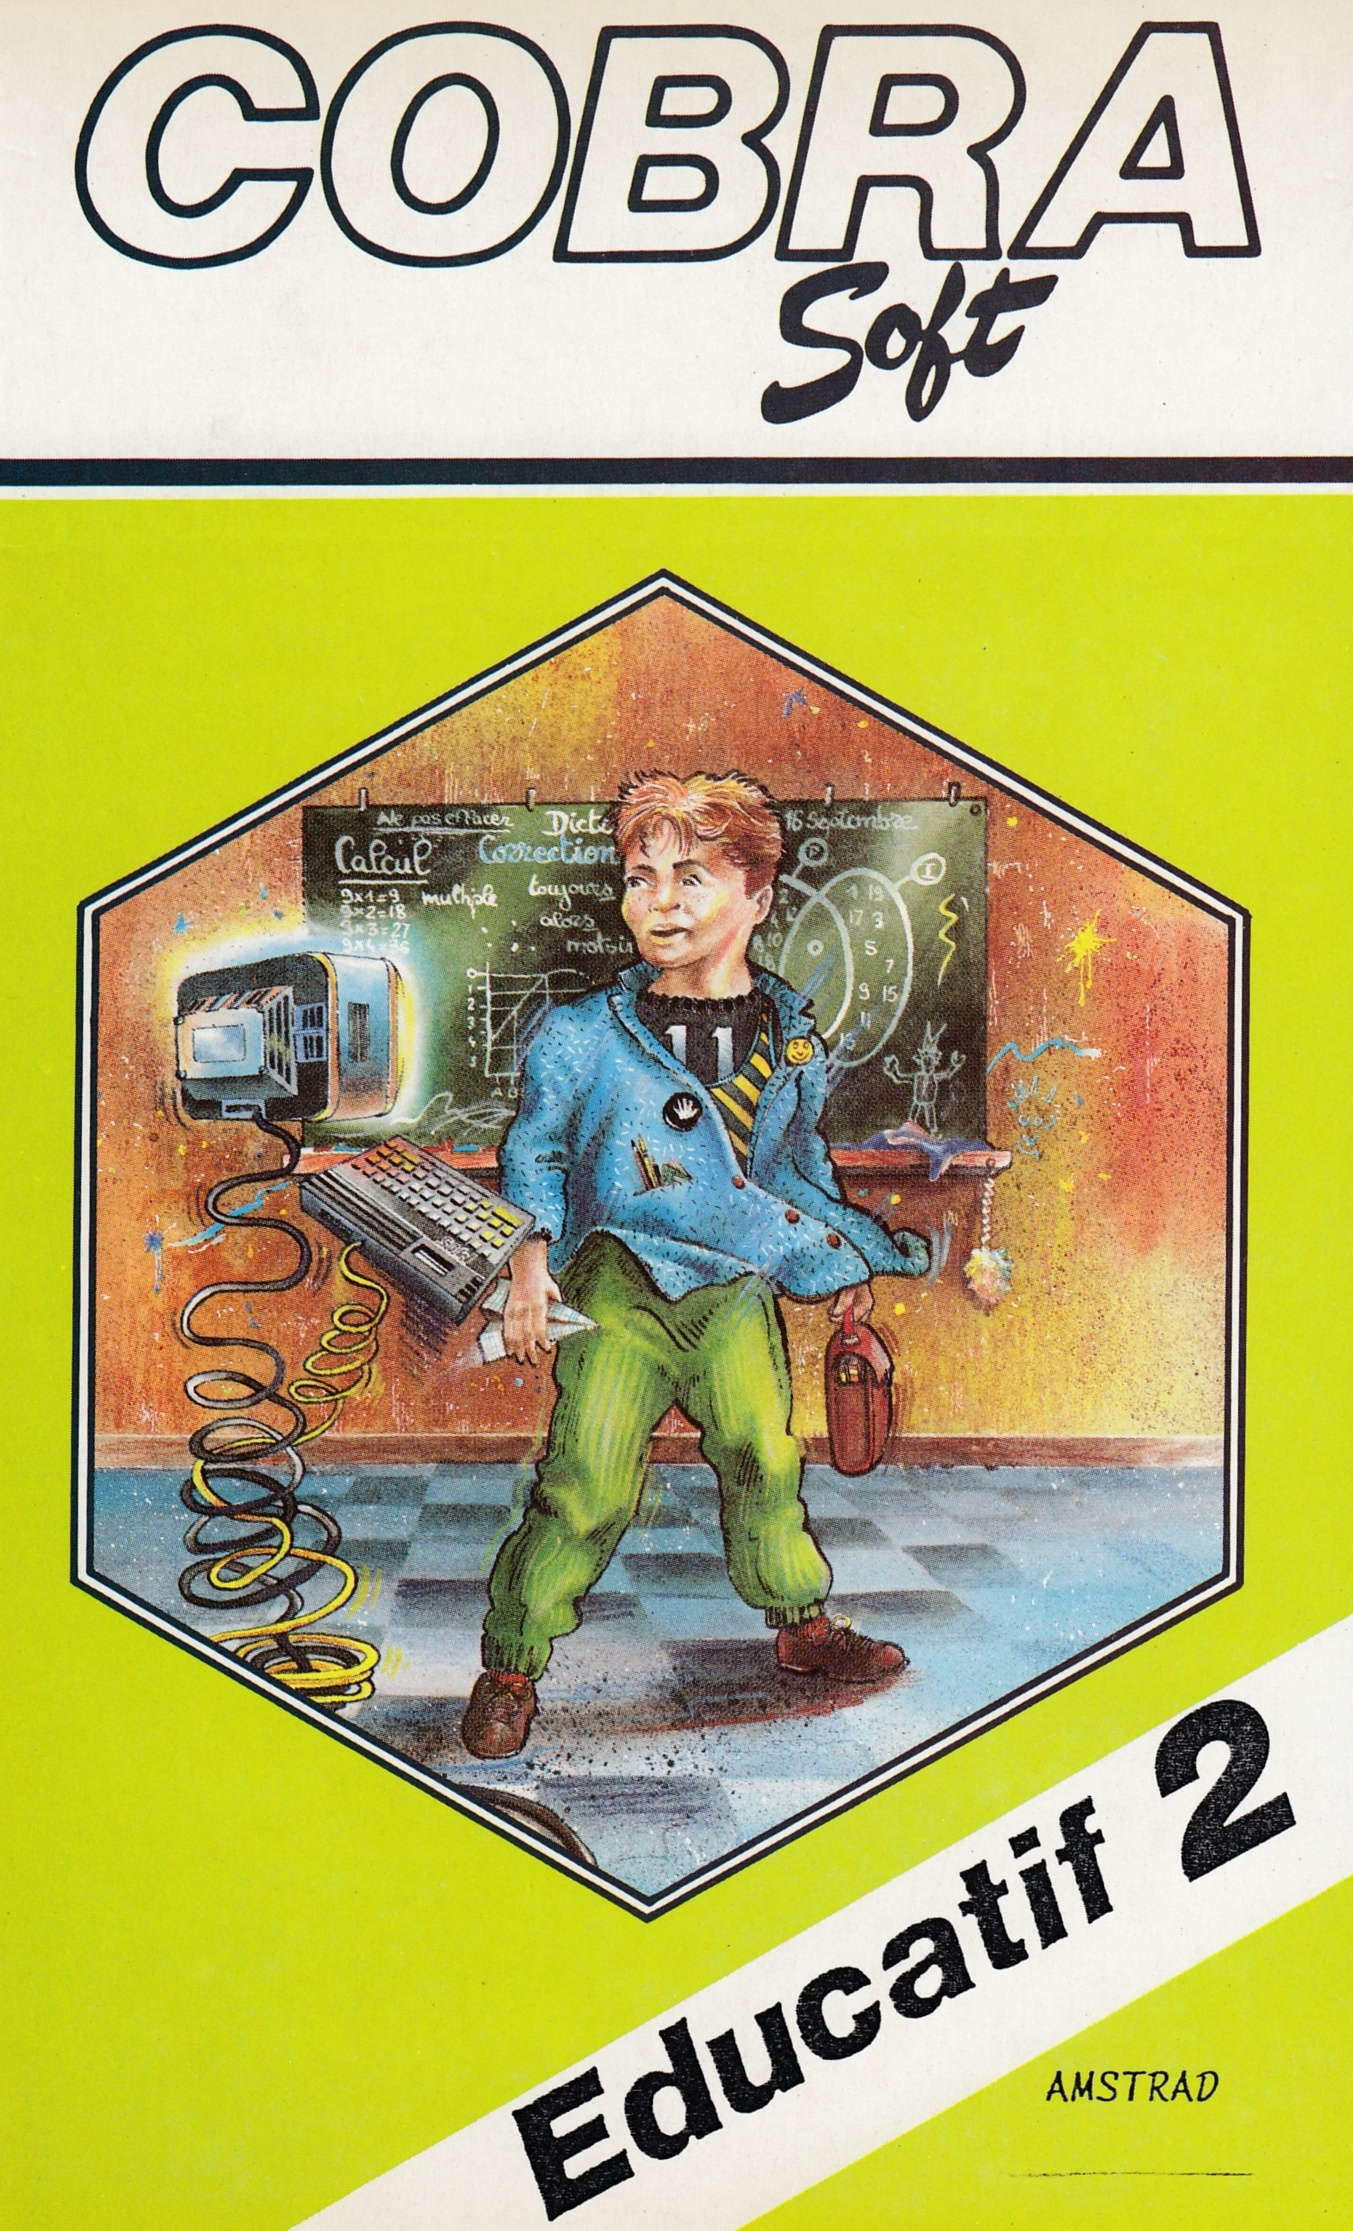 cover of the Amstrad CPC game Educatif 2  by GameBase CPC